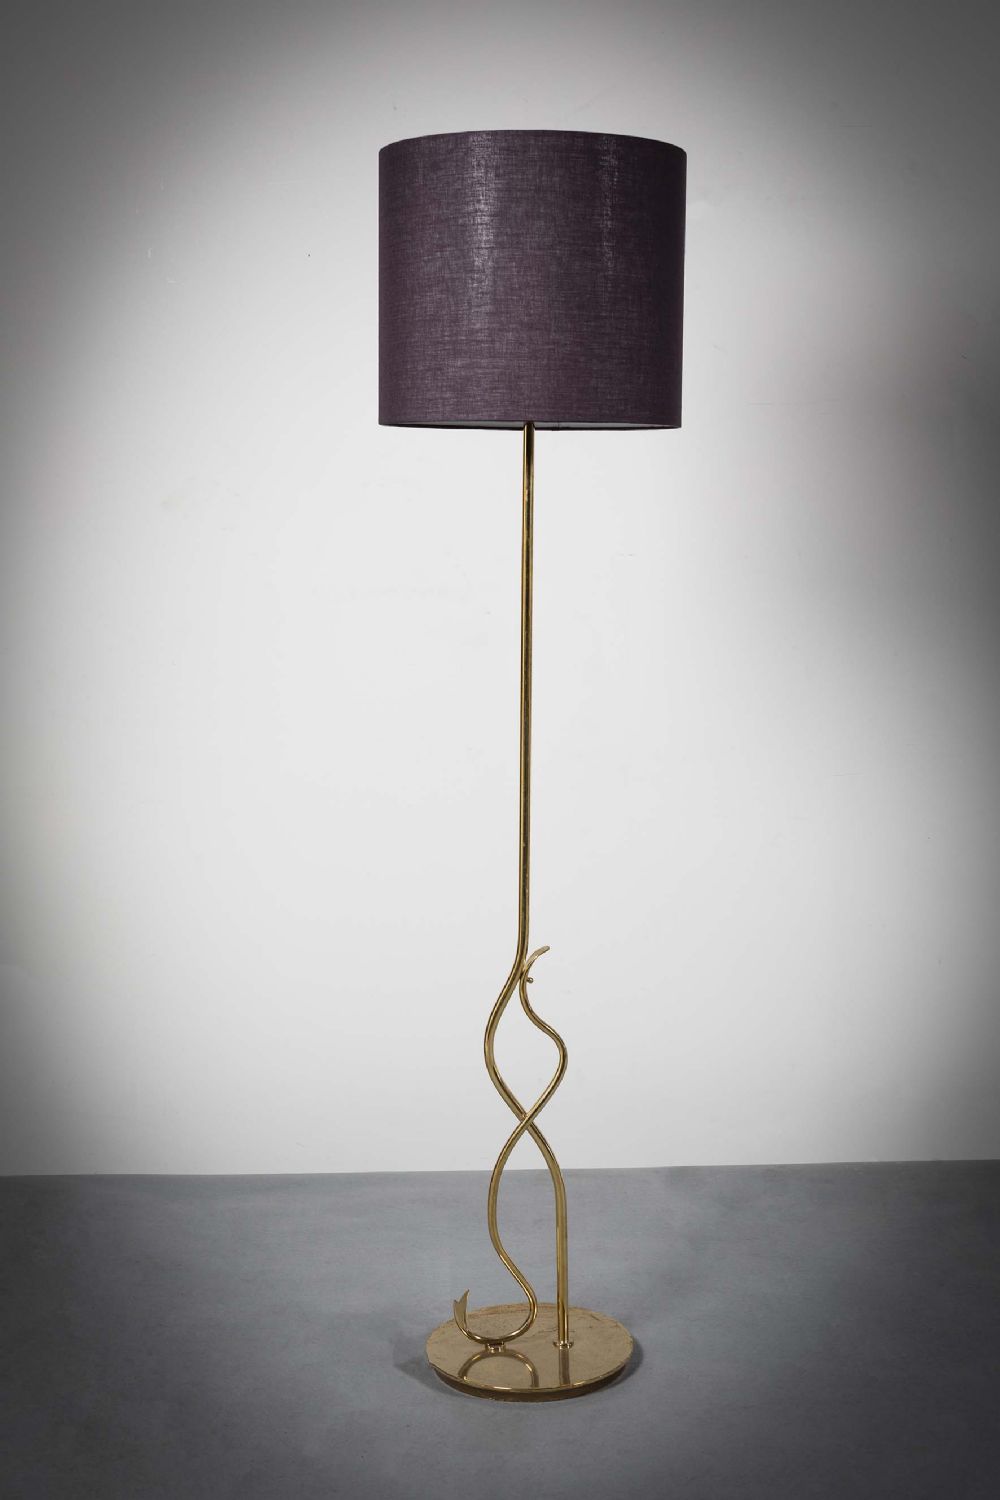 A GILT STANDARD LAMP at deVeres Auctions